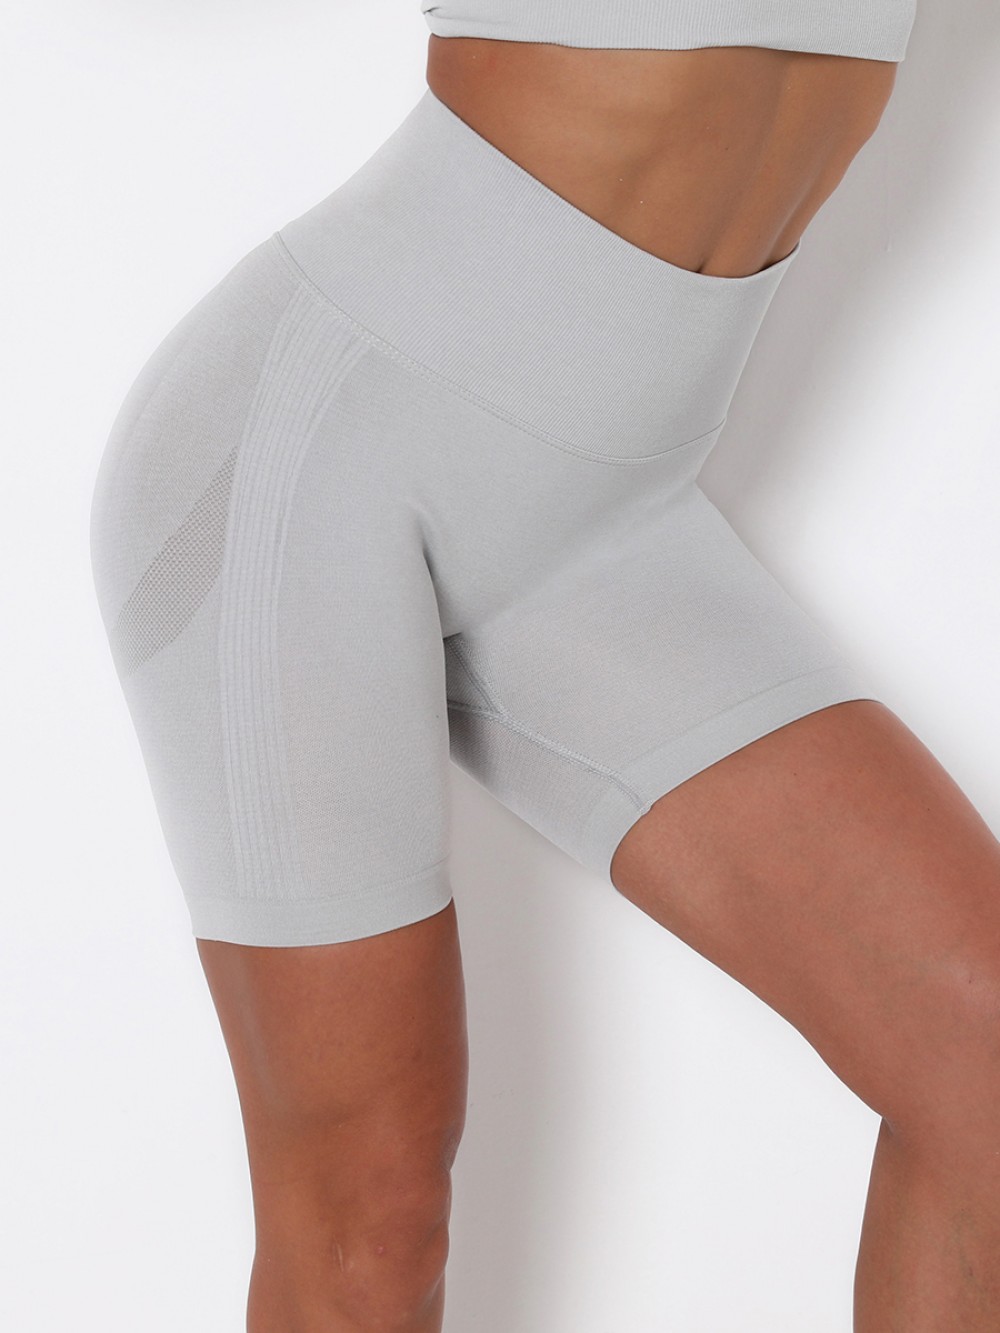 Light Gray Thigh Length Solid Color Running Shorts Ladies Activewear